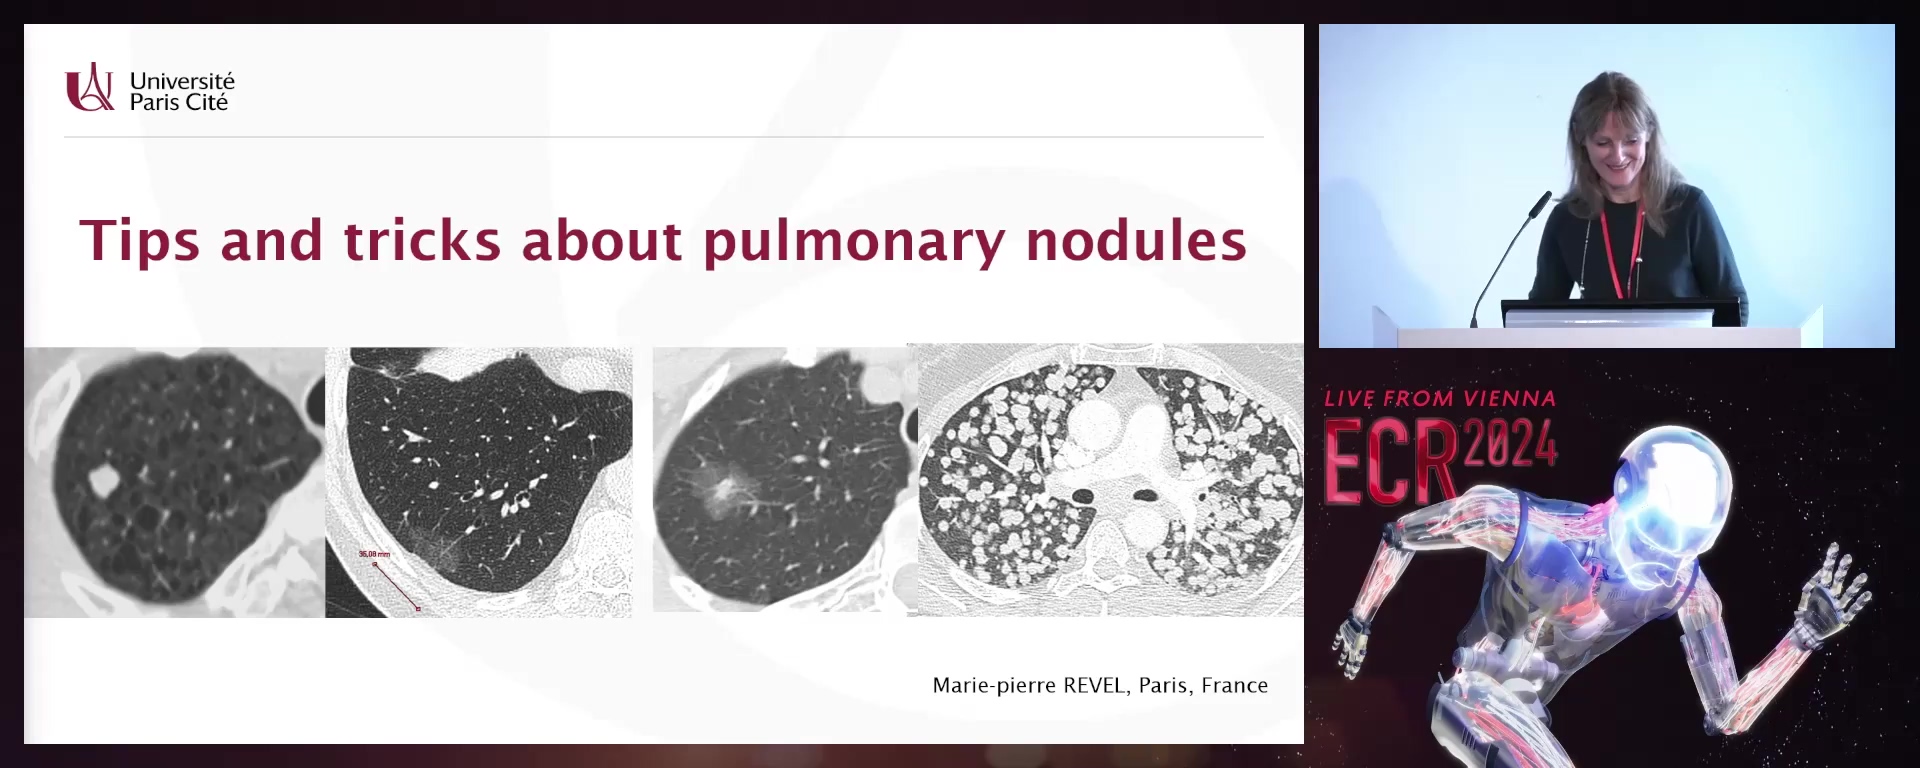 Tips and tricks about pulmonary nodules